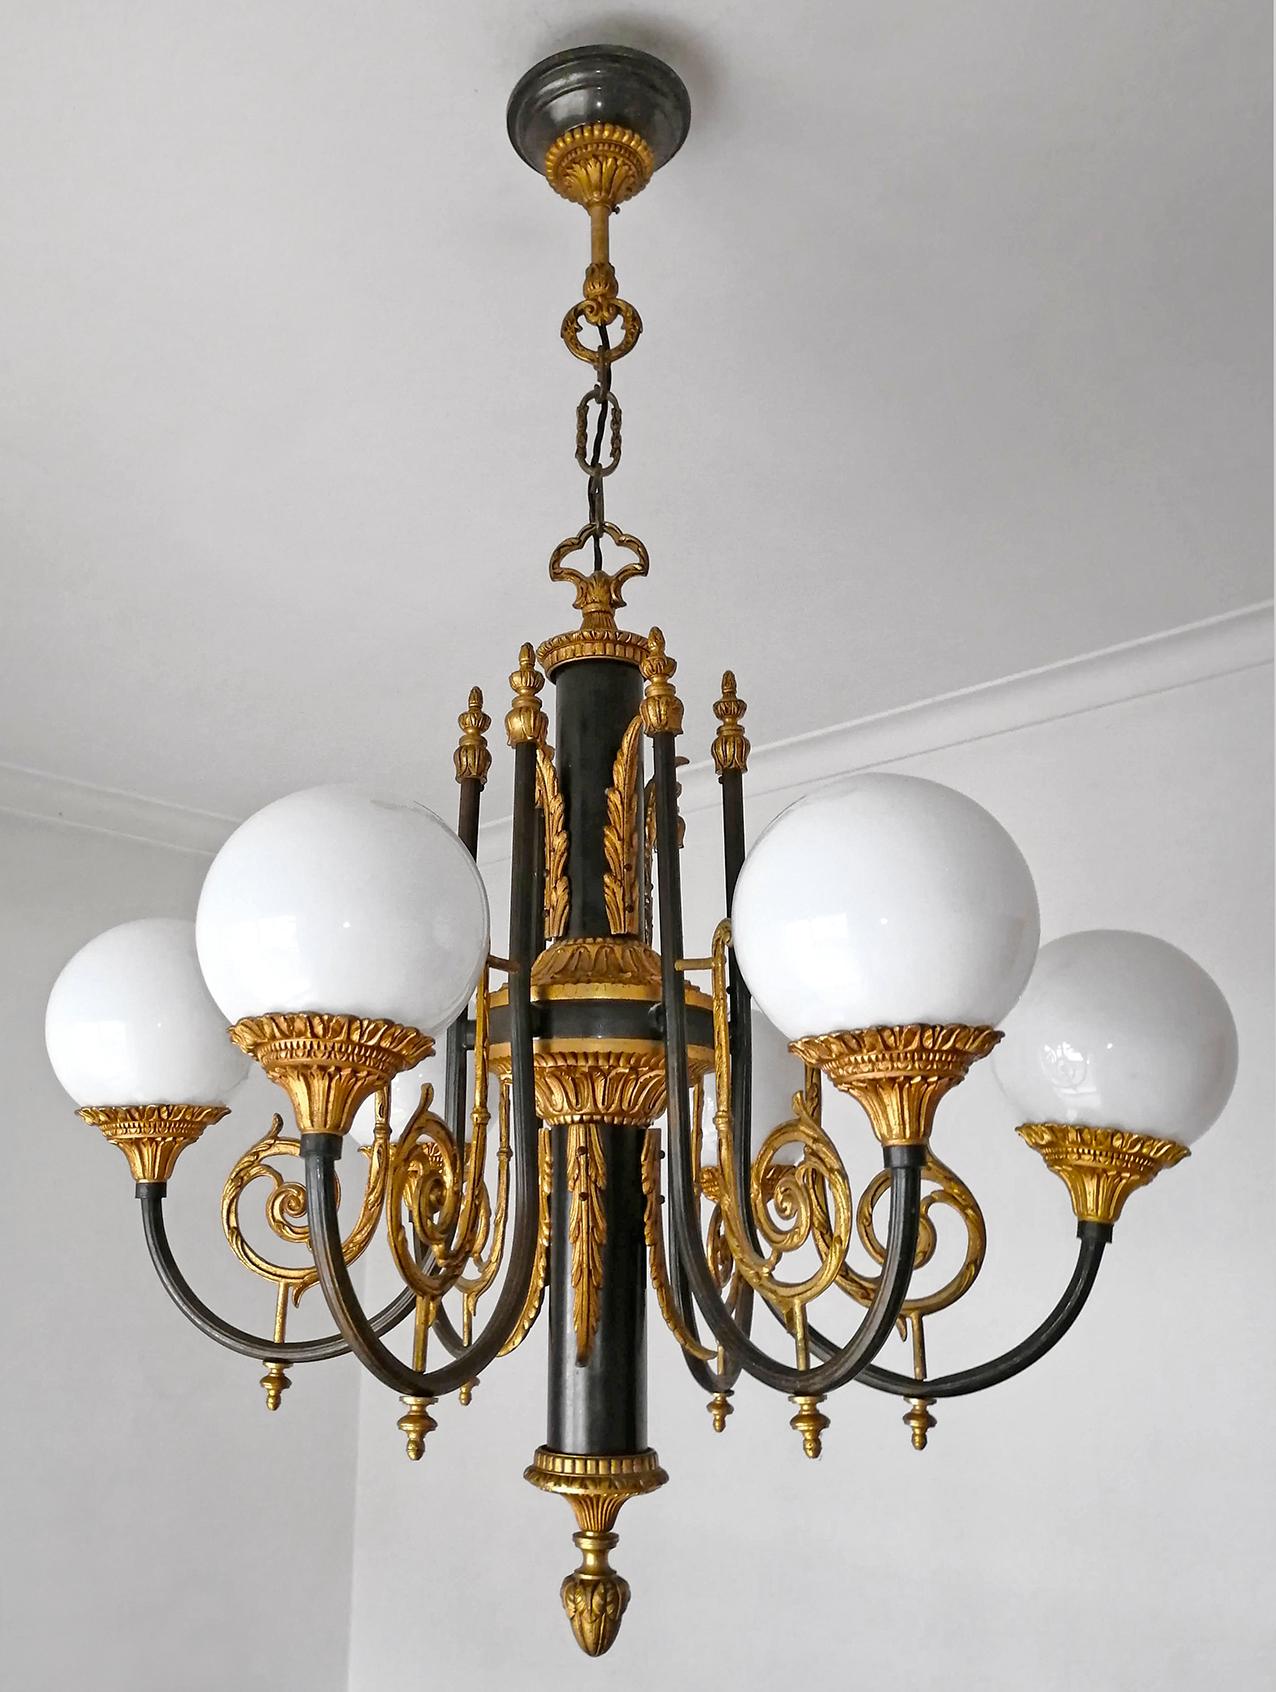 20th Century Antique French Empire Neoclassical Gilt & Patina Bronze Opaline Globe Chandelier For Sale